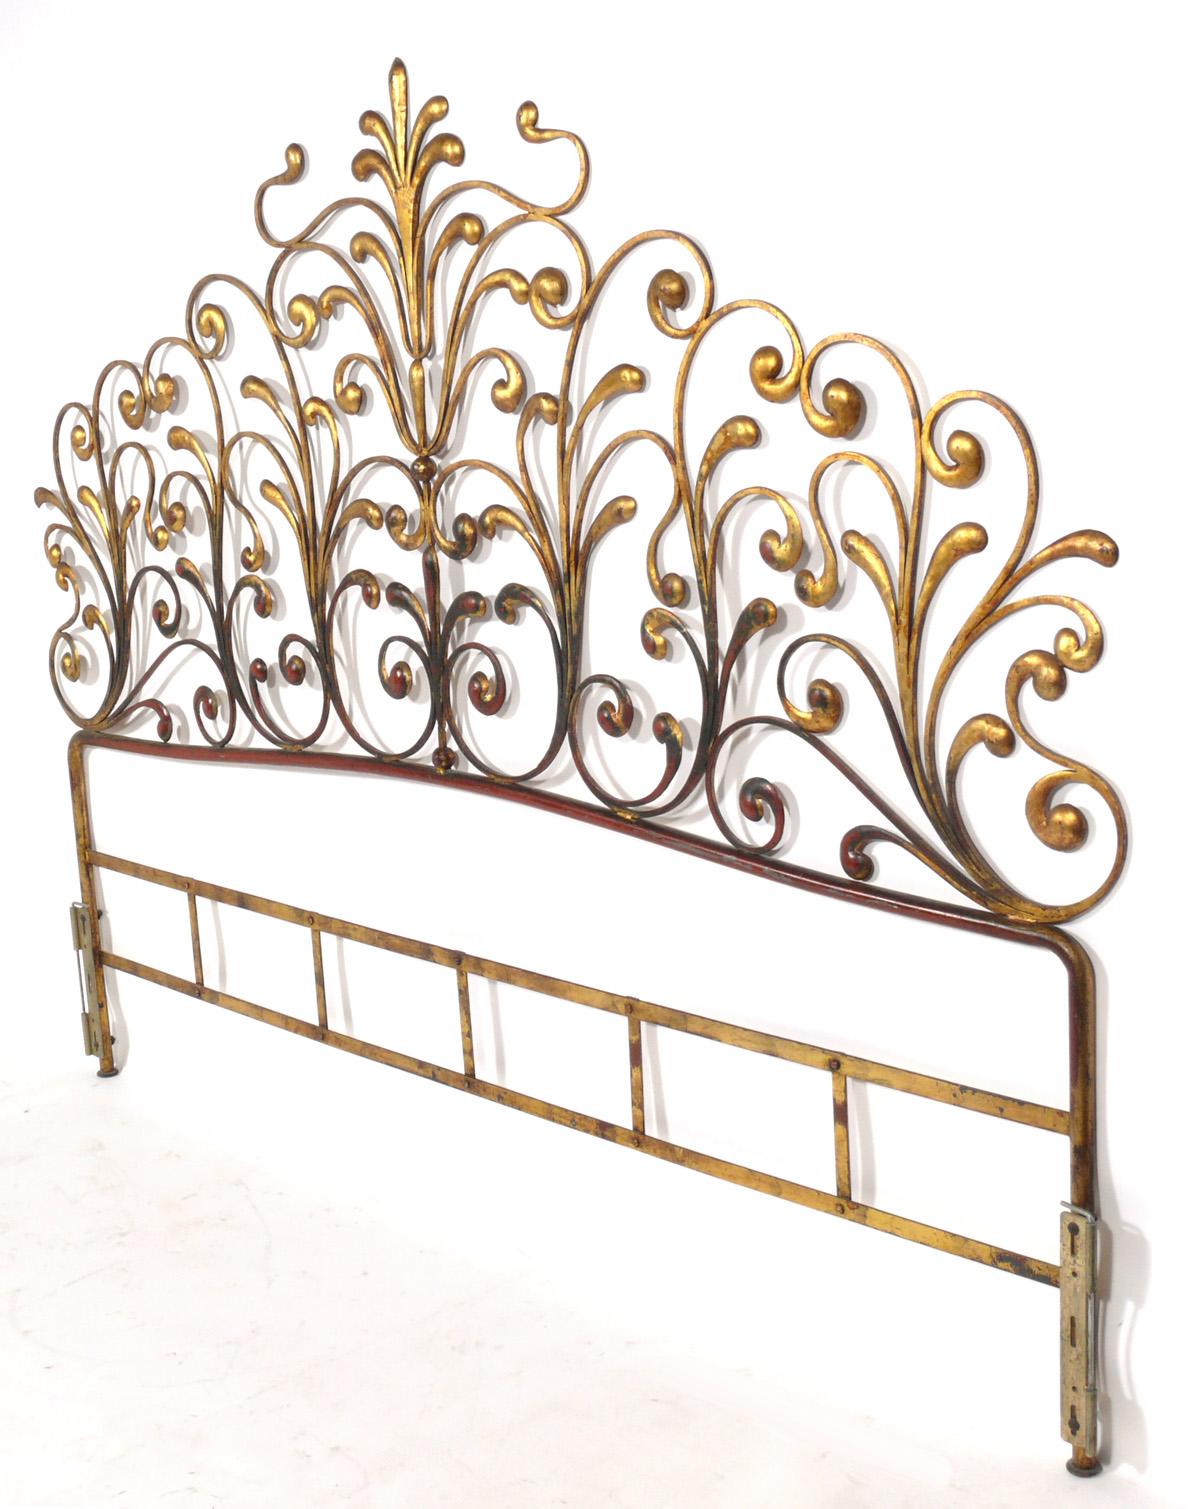 Glamorous gilt metal headboard, Italian, circa 1950s. It retains its original gilt finish with a wonderful patina with some overall wear to the gold leafed metal frame, exposing the Chinese red color underlayer or bole.